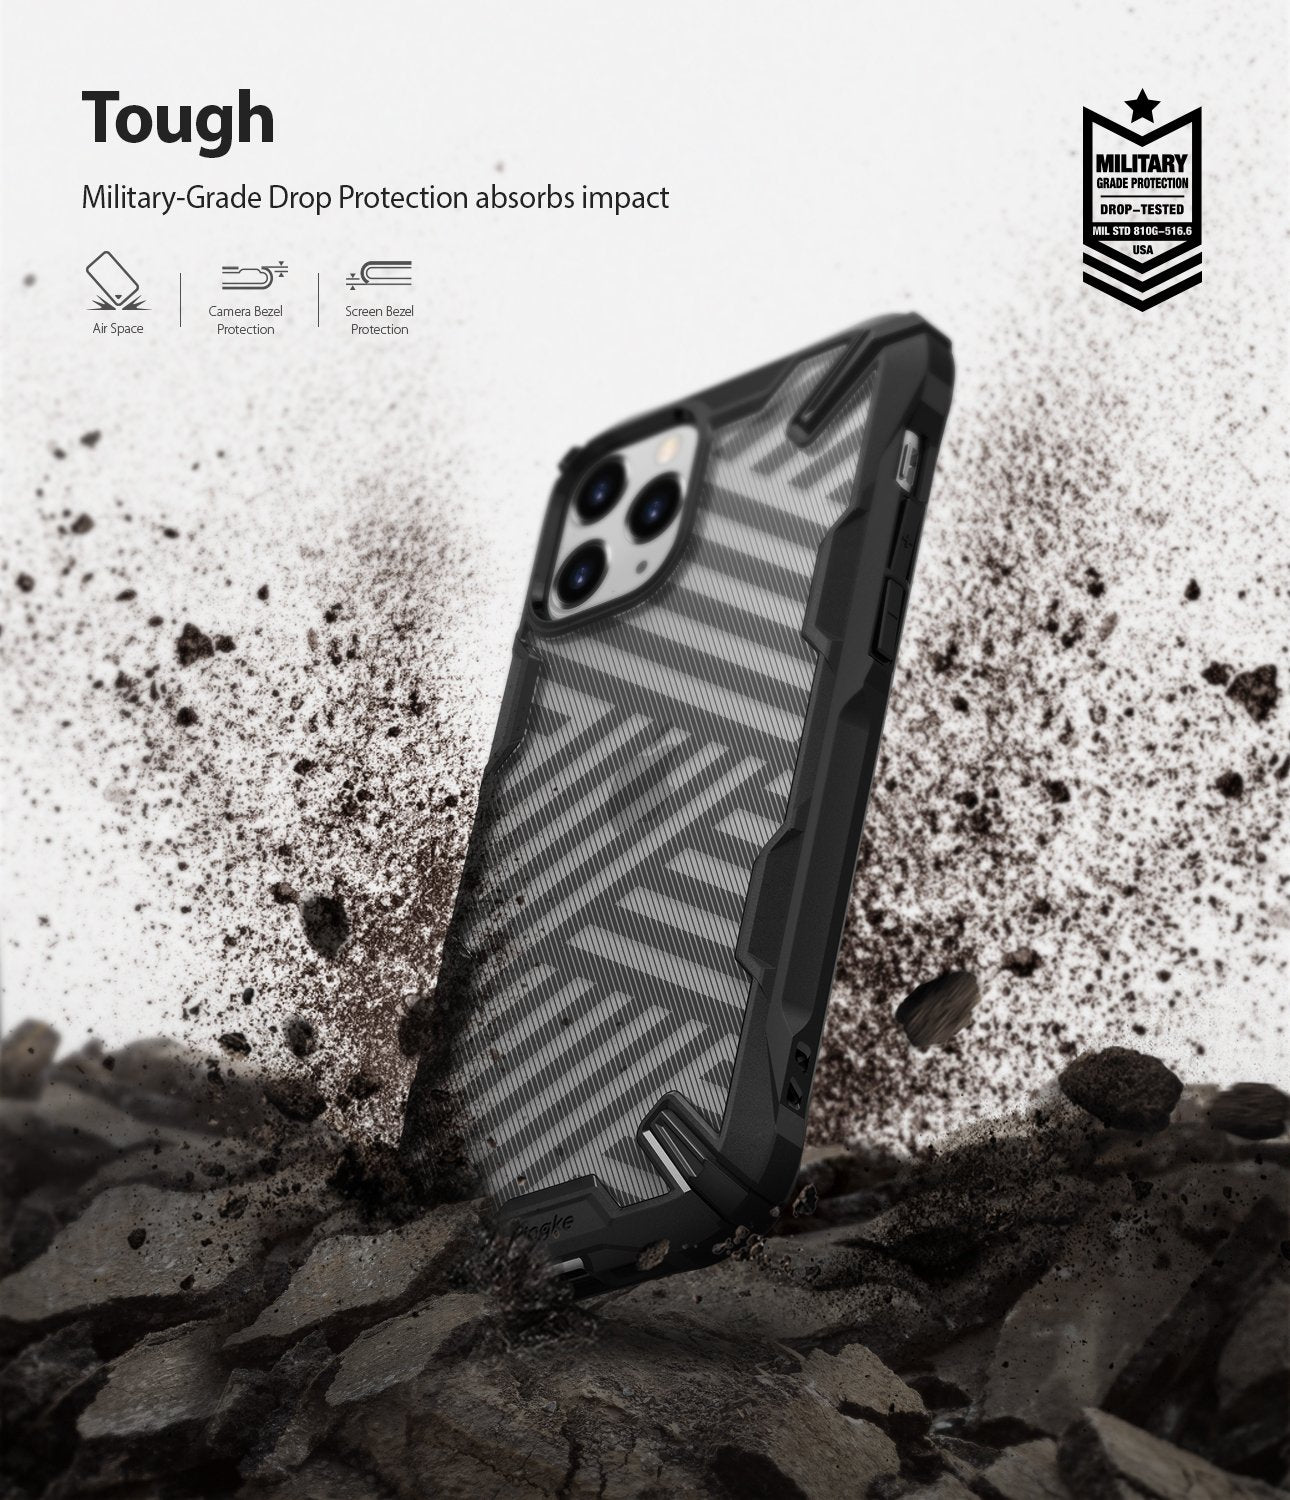 iPhone 11 Pro Max Case  Ringke Fusion – Ringke Official Store